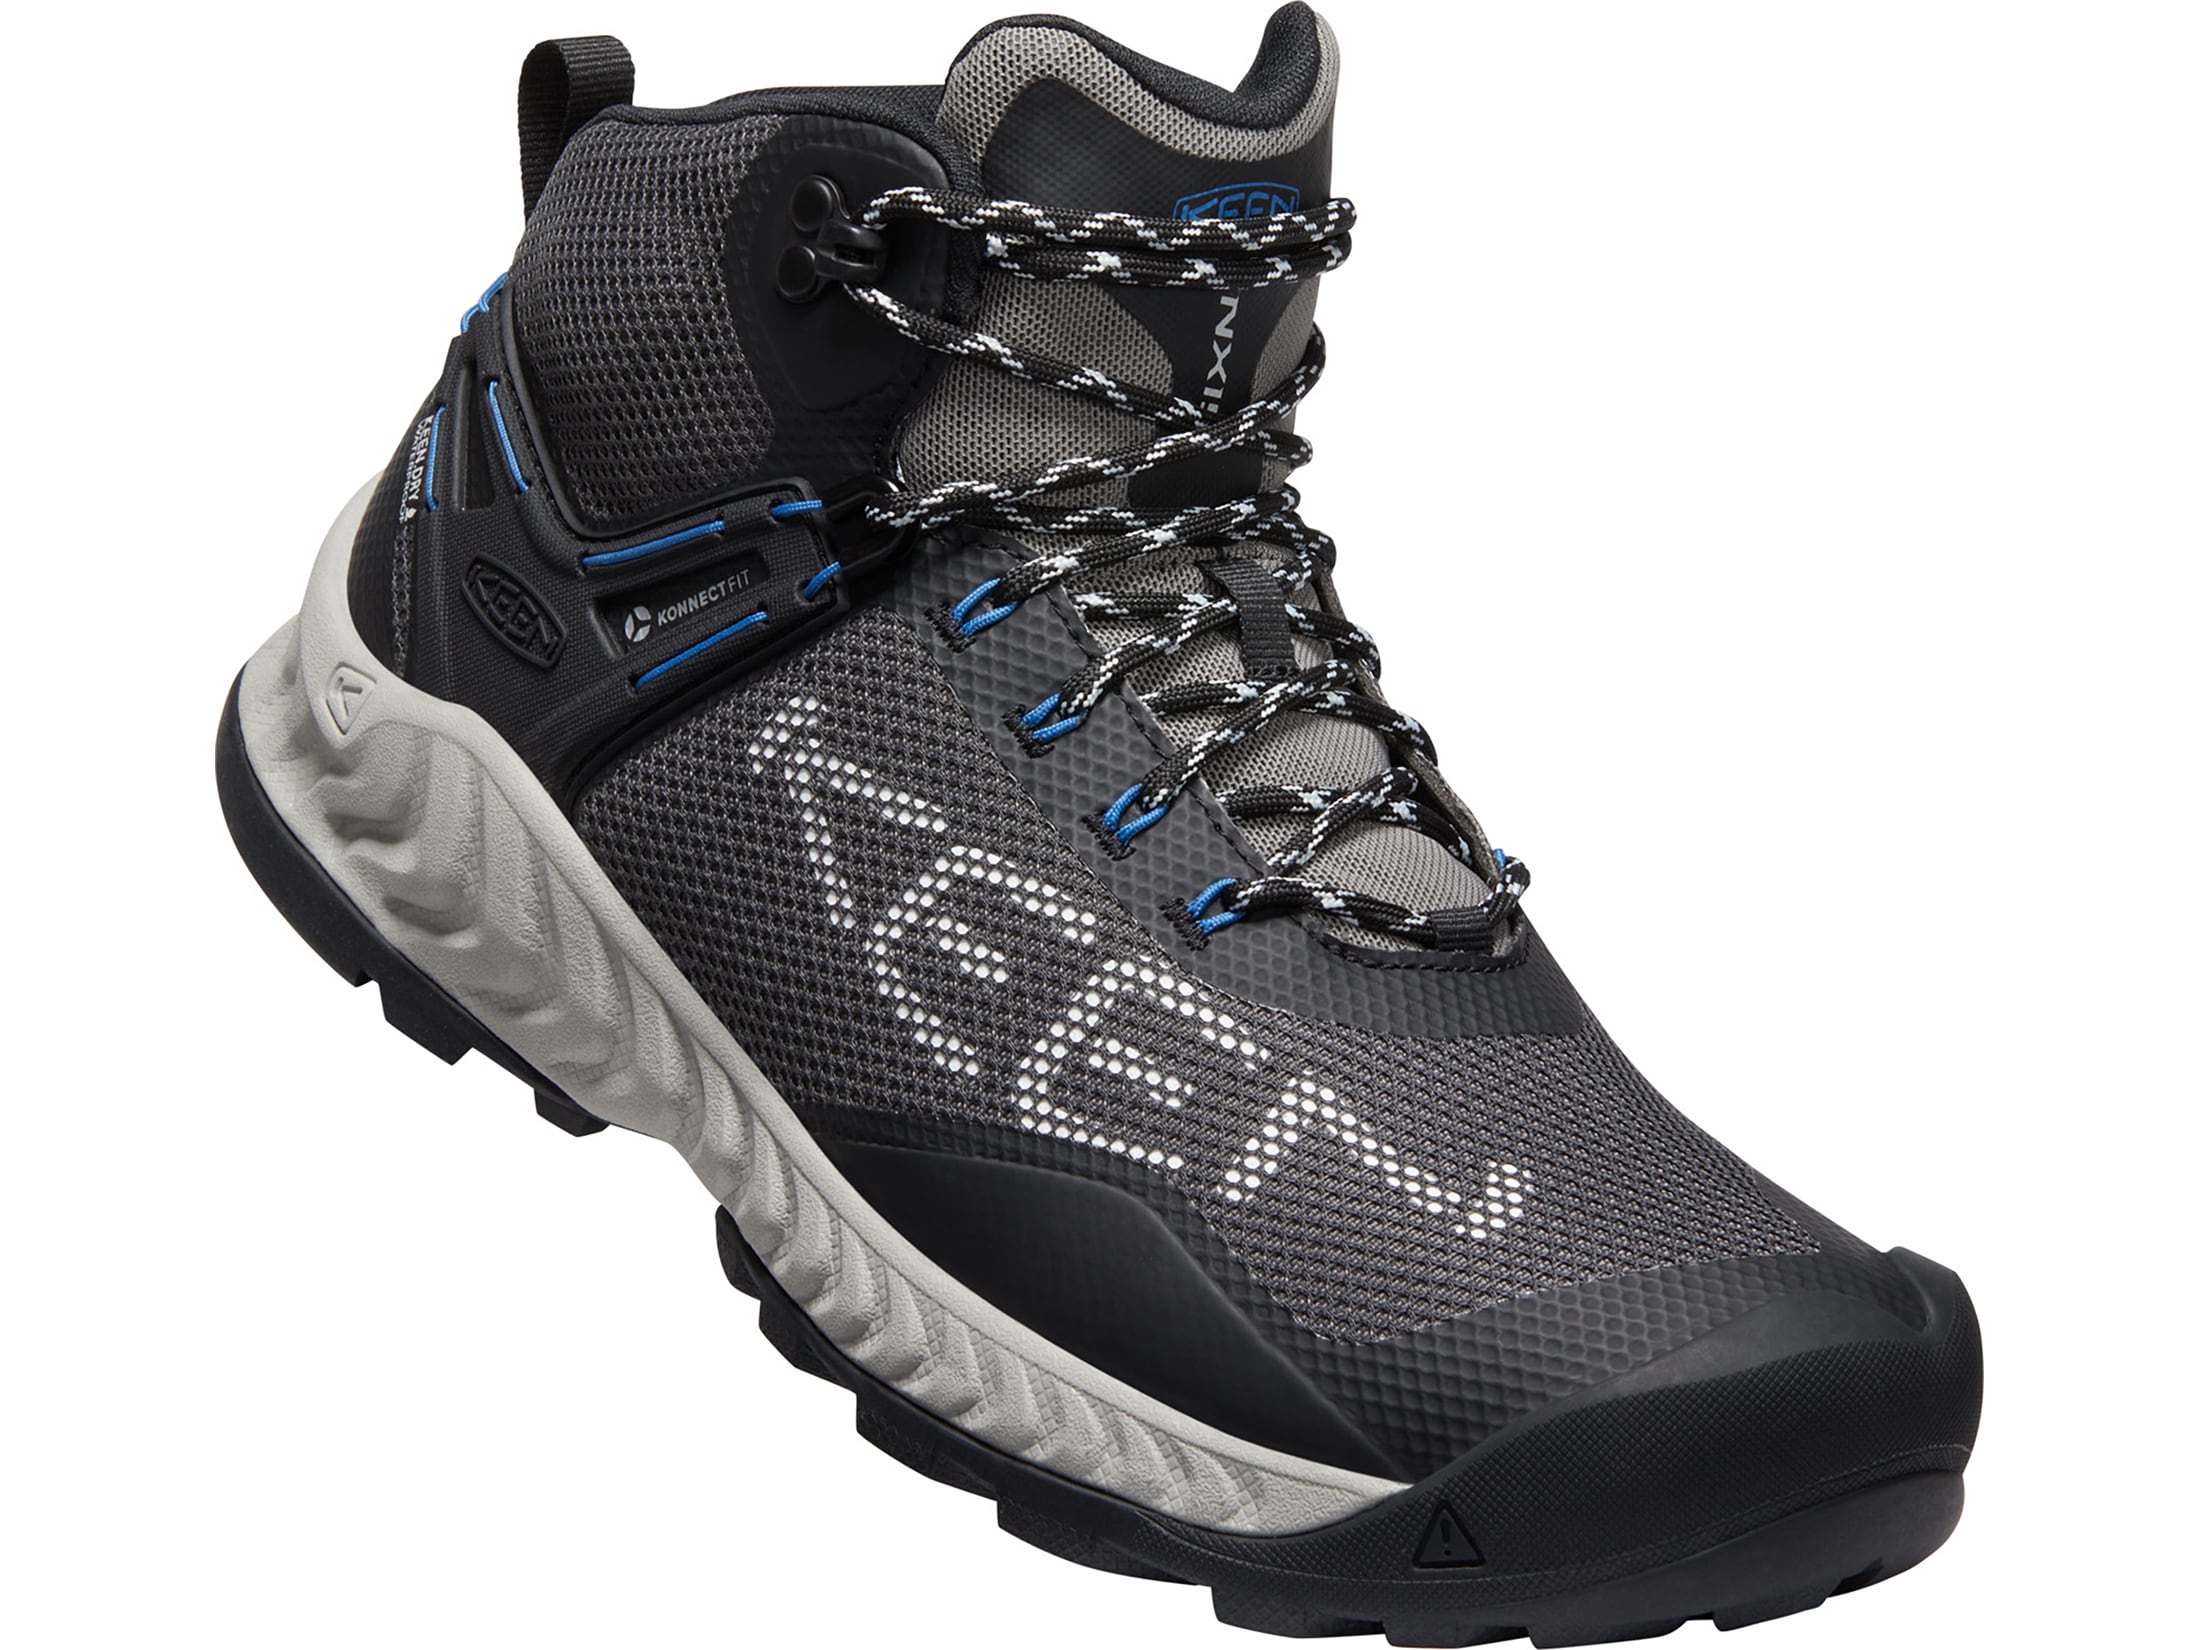 Keen Nxis EVO Mid Hiking Shoes Synthetic Magnet/Bright Cobalt Men's 8